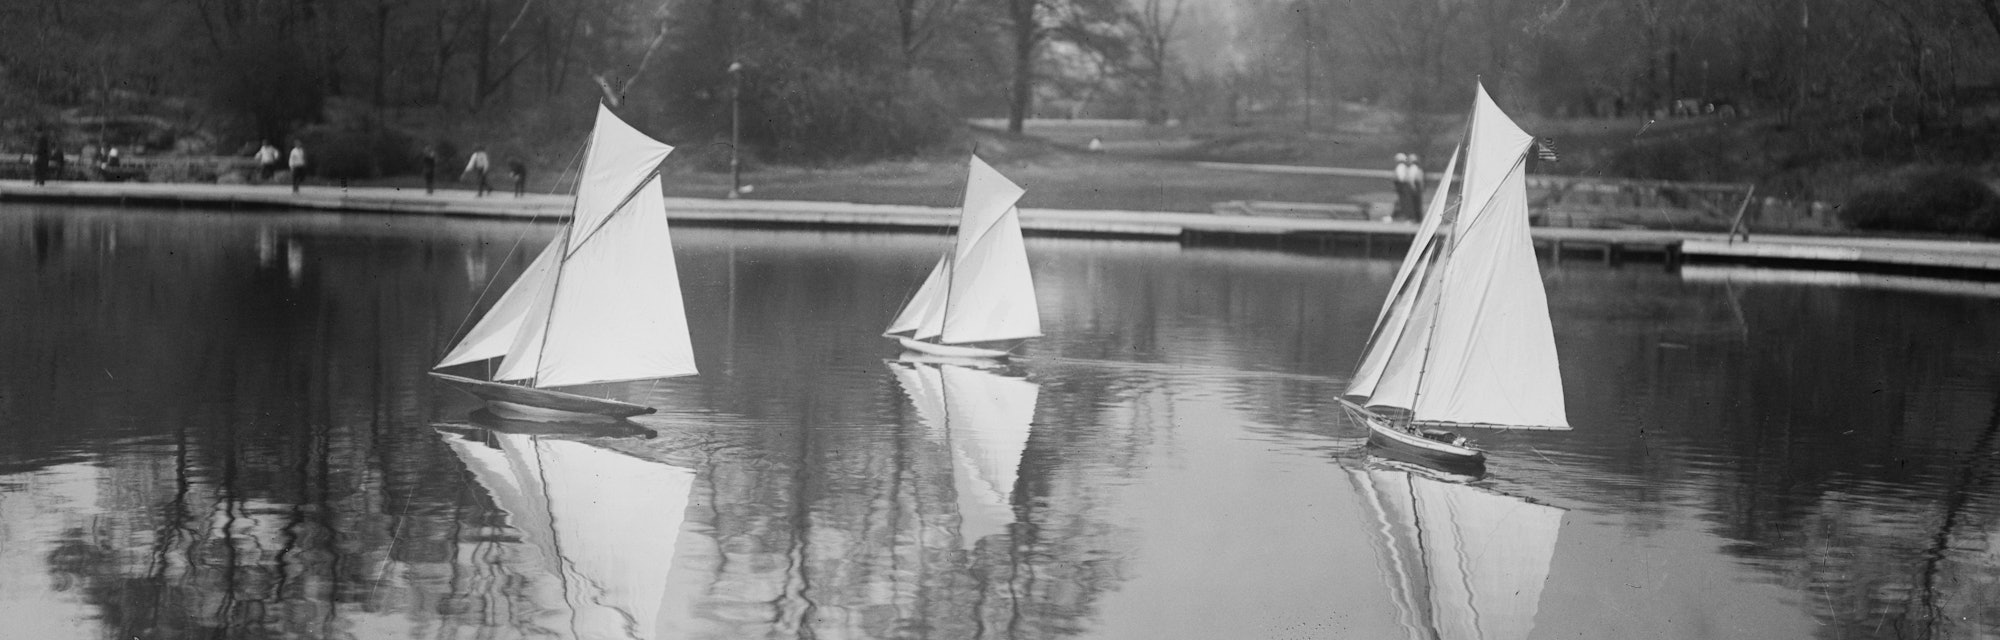 Model yachts during a race at Conservatory Lake, Central Park, New York City ca. 1910-1915. (Photo b...